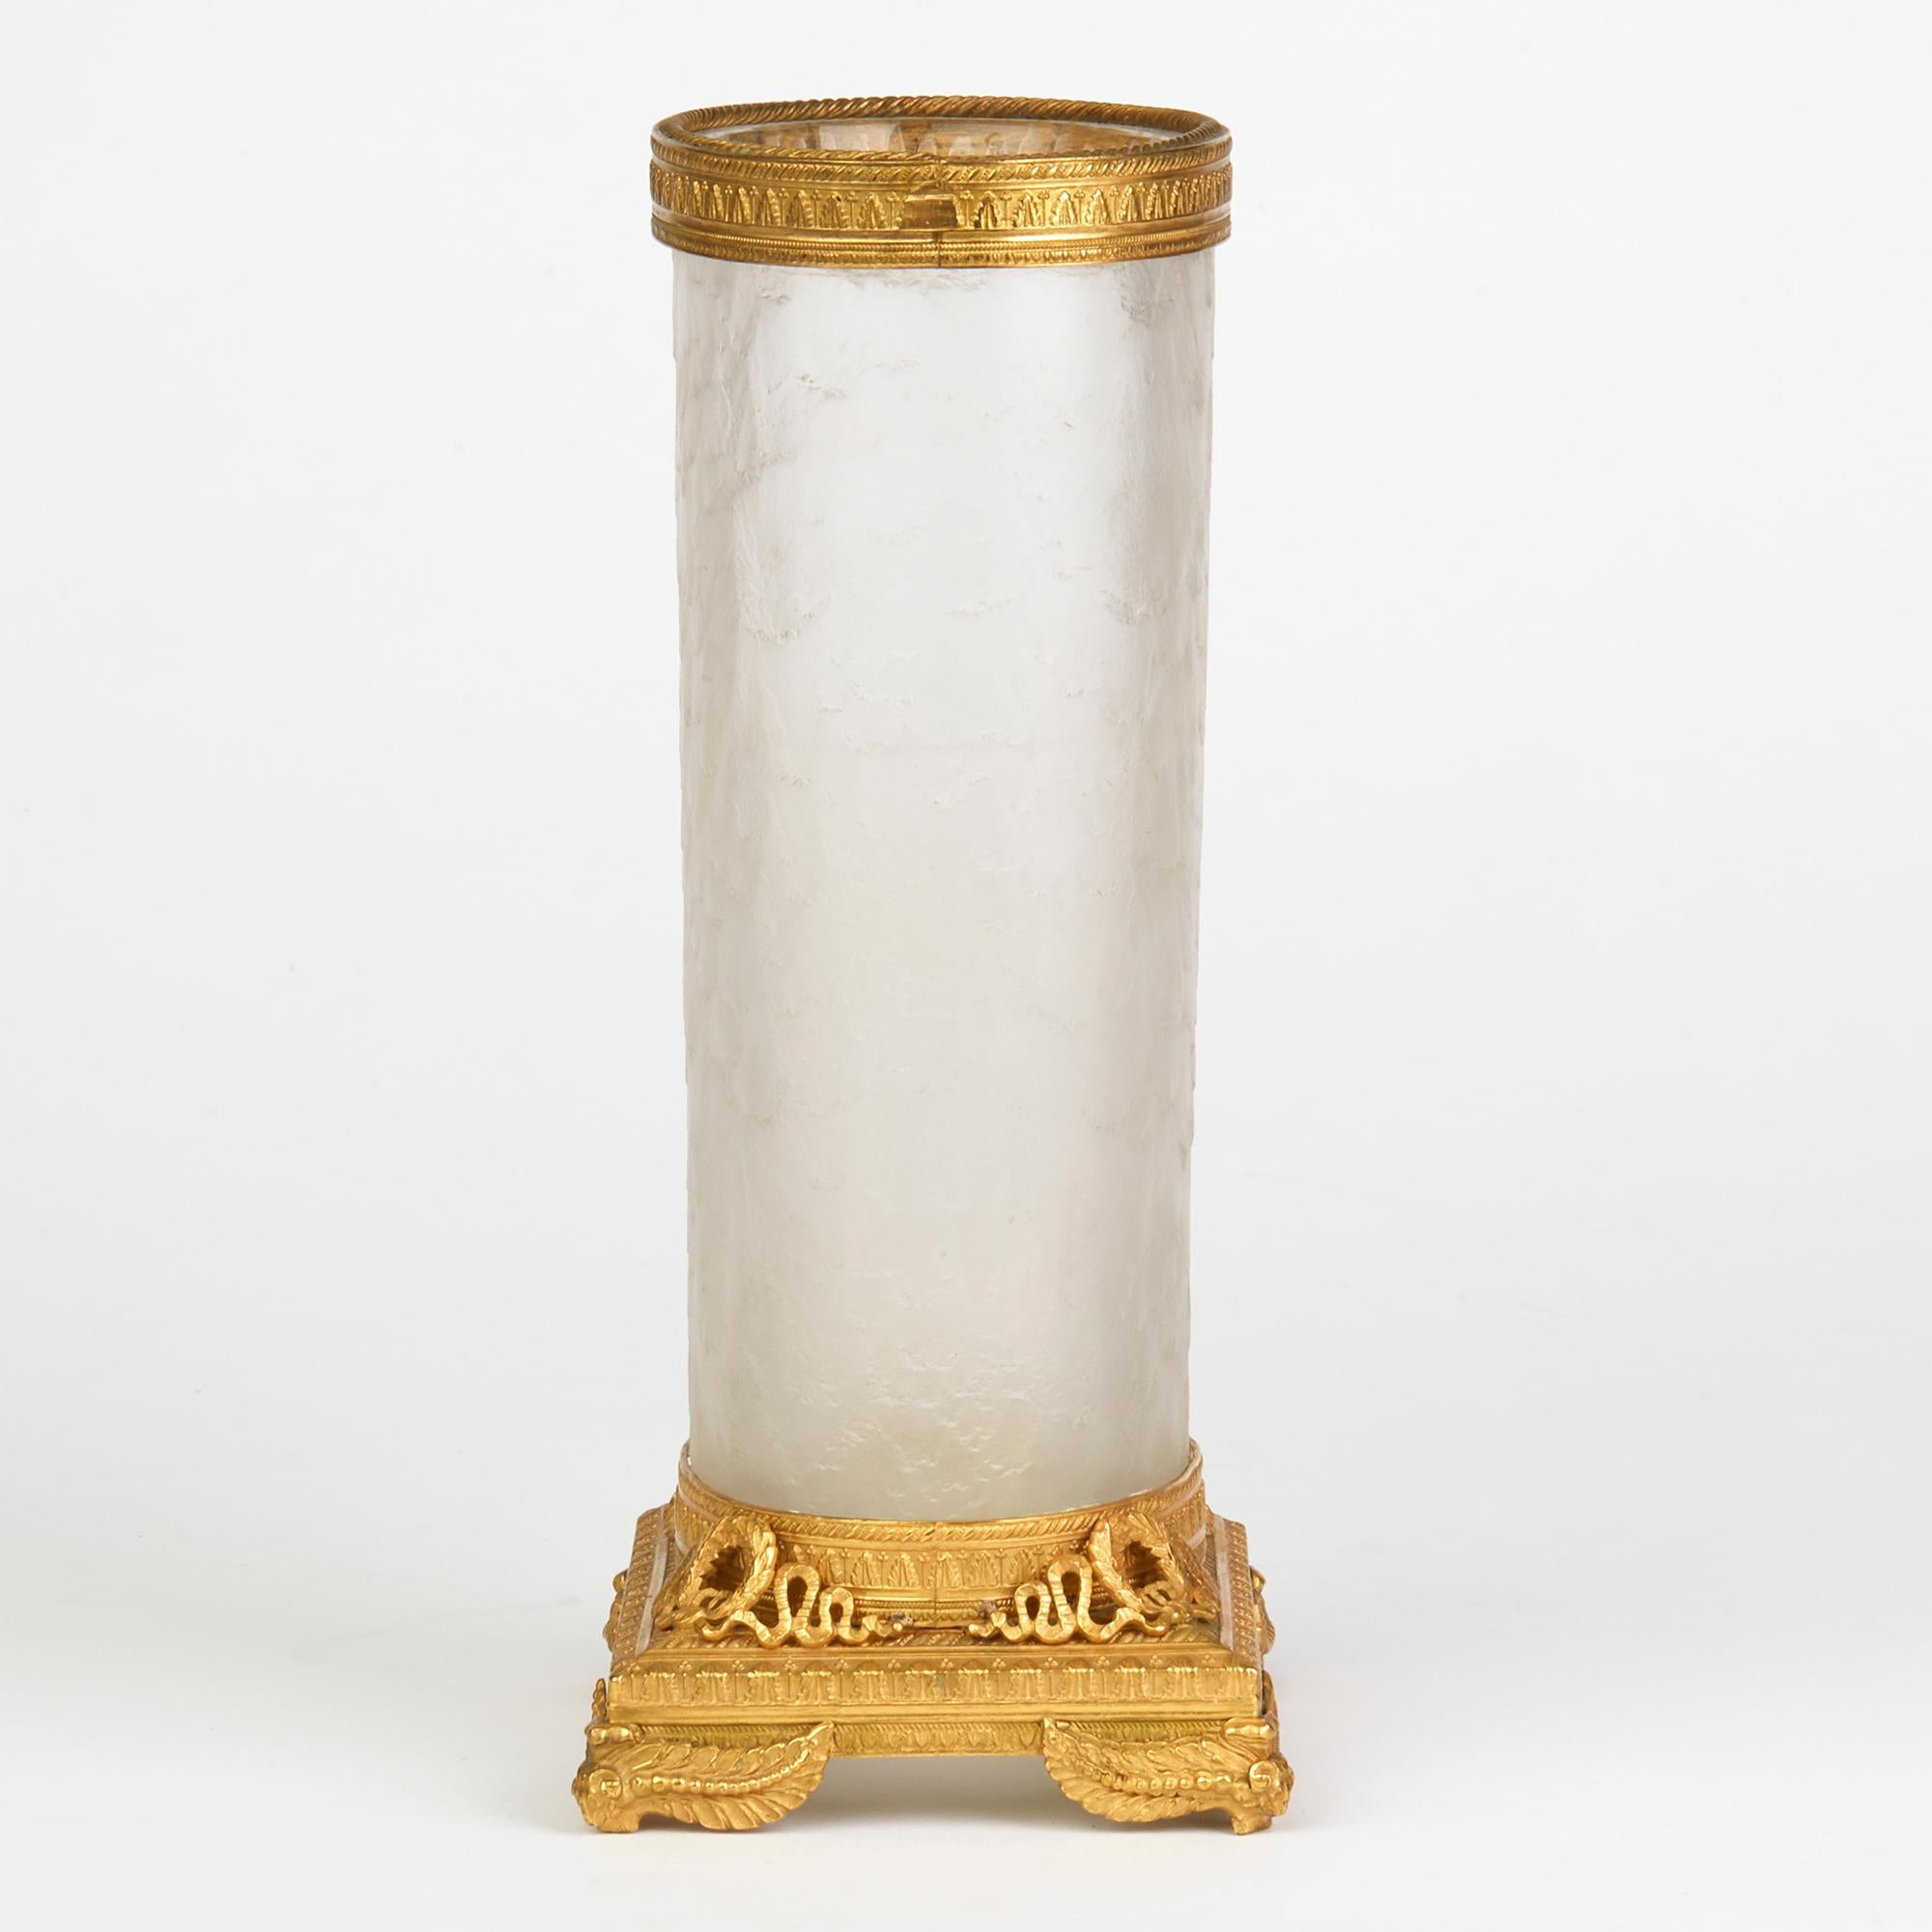 A fine antique French ormolu-mounted sleeve shaped glass vase of cylindrical form with a finely frosted and textured finish with raised gilded mount finely detailed with open work ribbon and winged ram head feet with a gilded and patterned metal rim